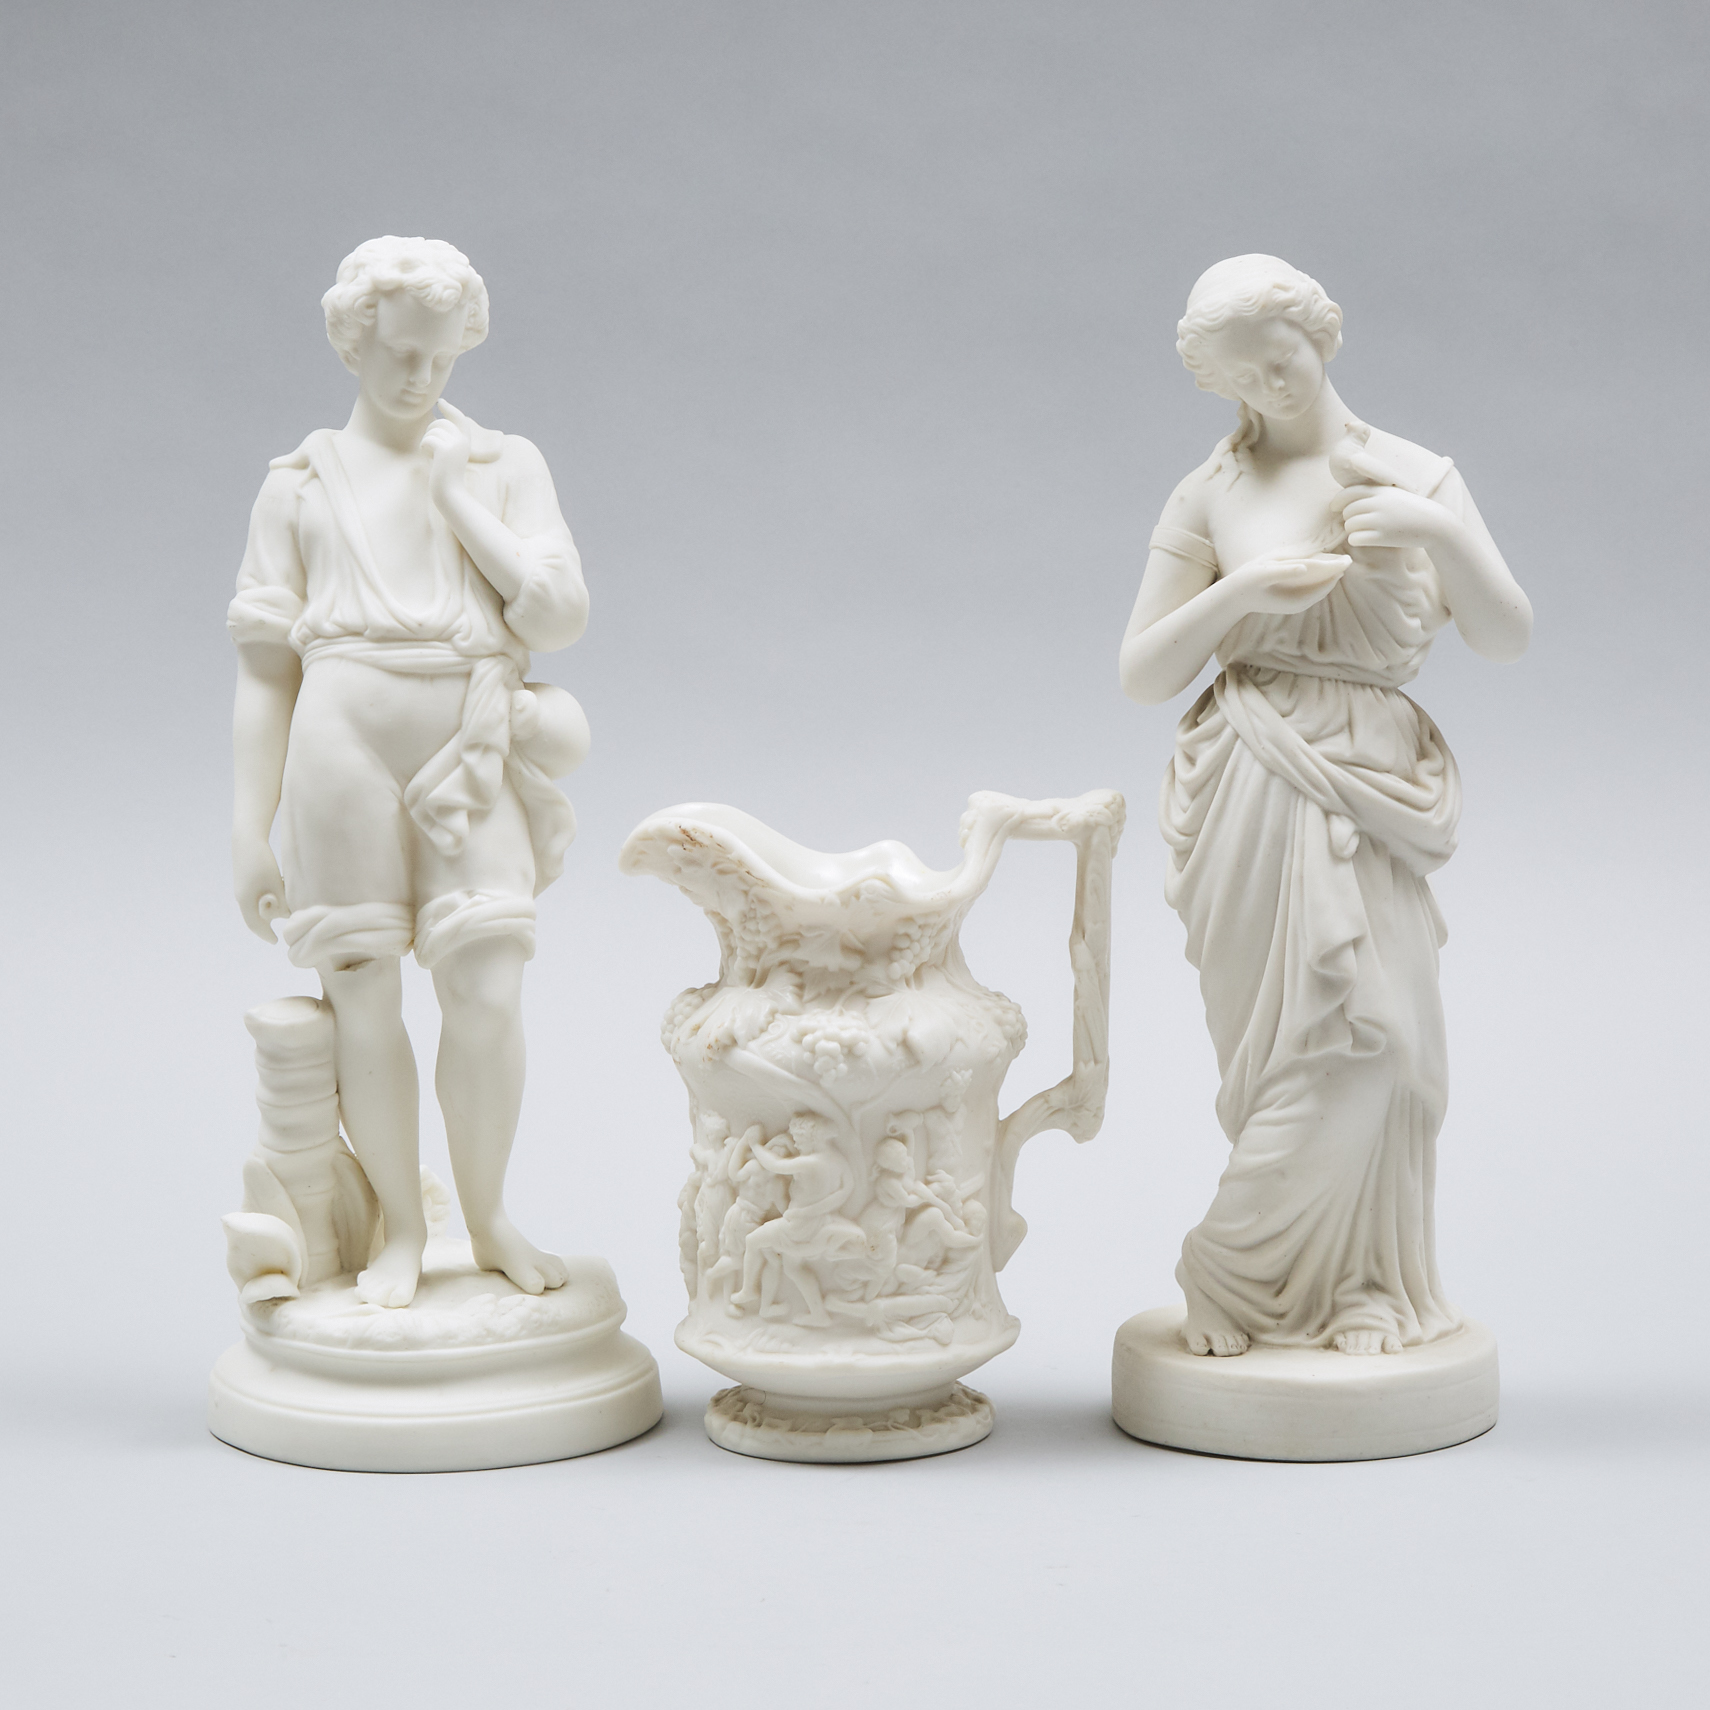 Pair of English Parian Figures of 'Peace' and Companion, and a Naturalistic Style Jug, mid-19th century